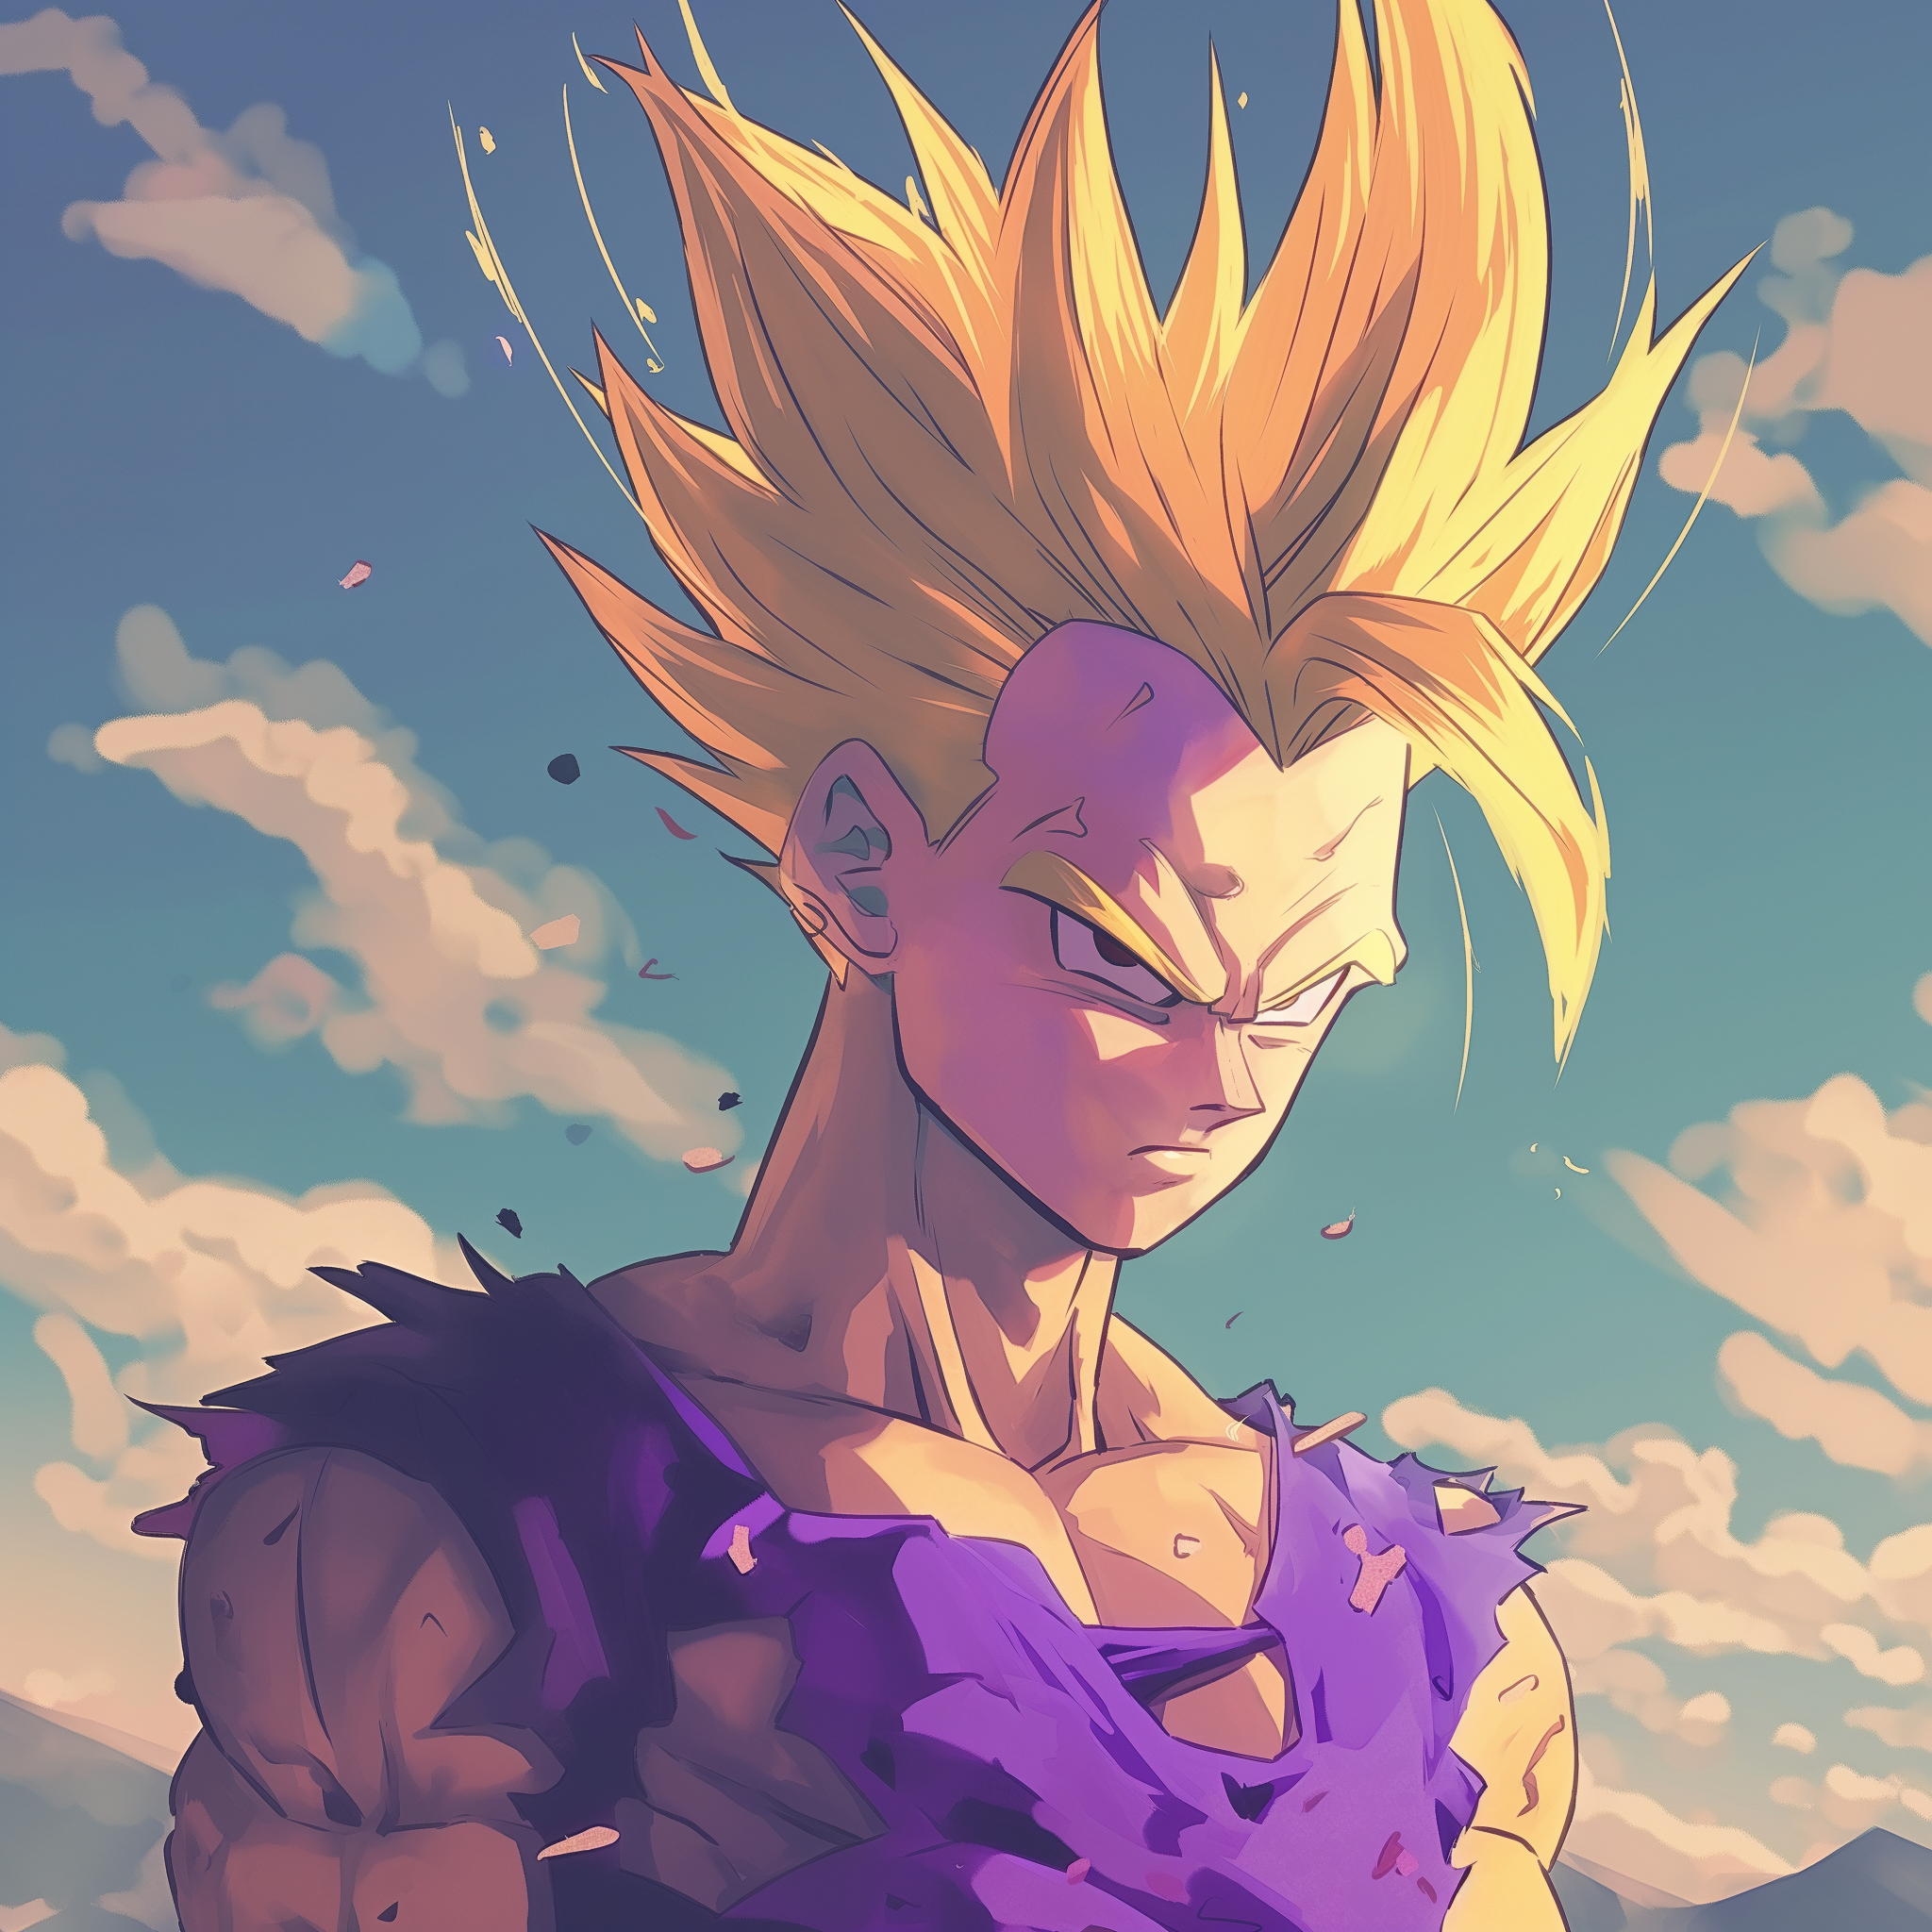 Avatar image of Gohan from Dragon Ball anime with spiked golden hair and determined expression against a sky backdrop.